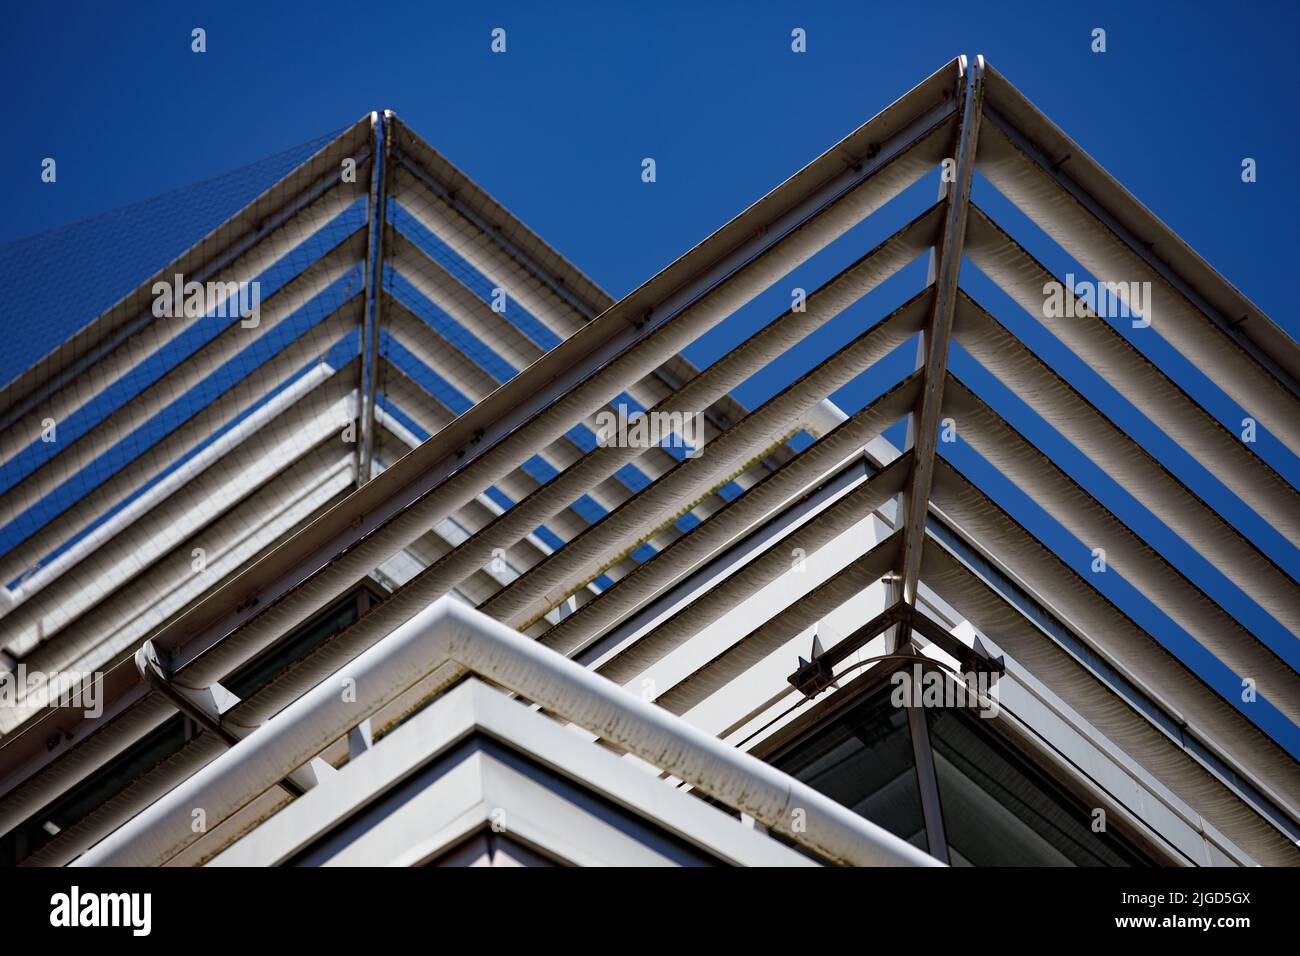 Abstract view of solar shading panels creating triangular lines on the side of an office building exterior Stock Photo